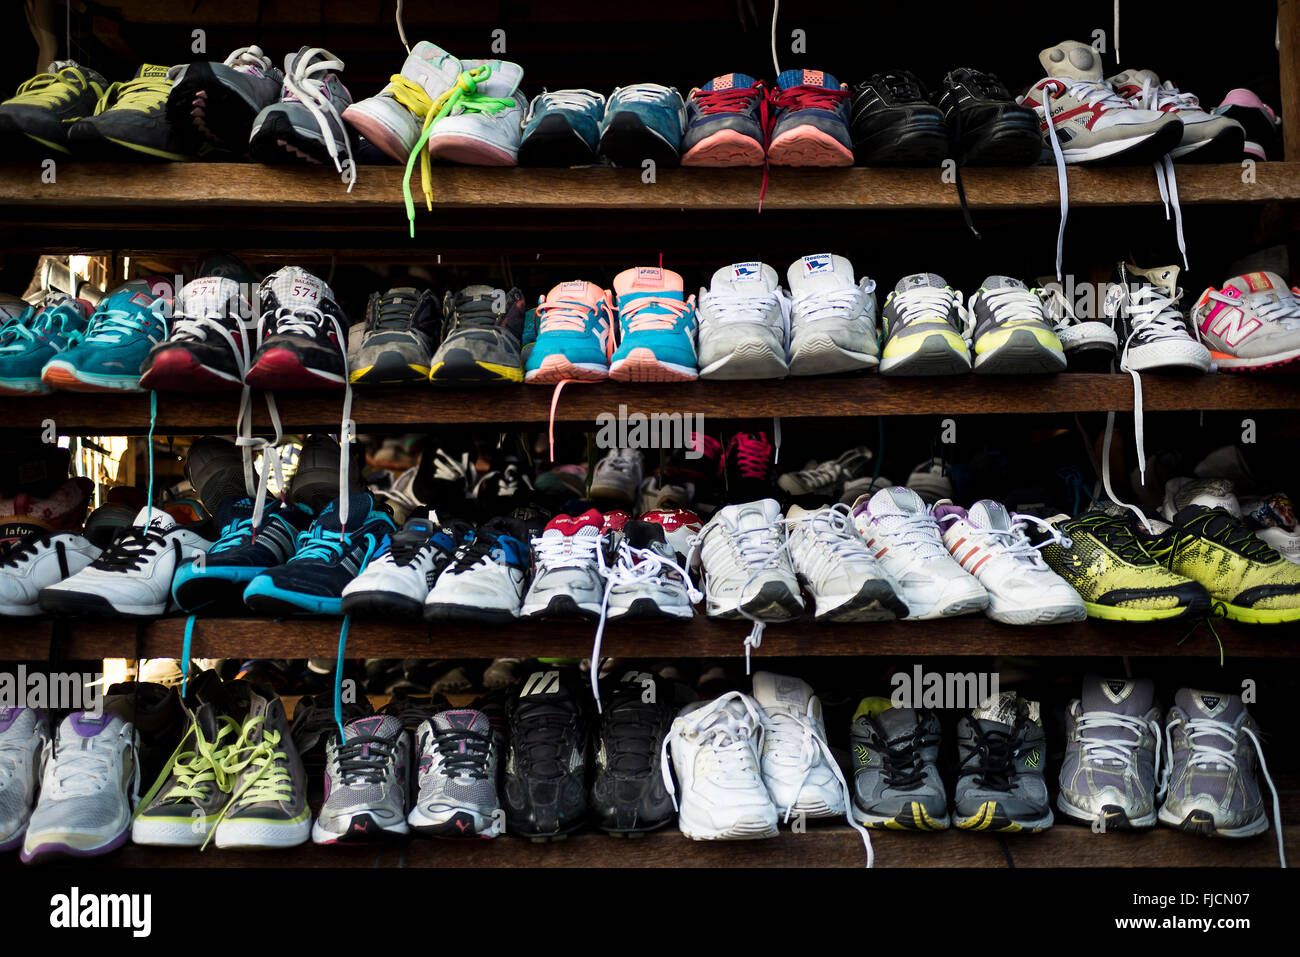 Kalibo, Philippines - February 13, 2016. Second hand shoes on the shelf of  a store Stock Photo - Alamy